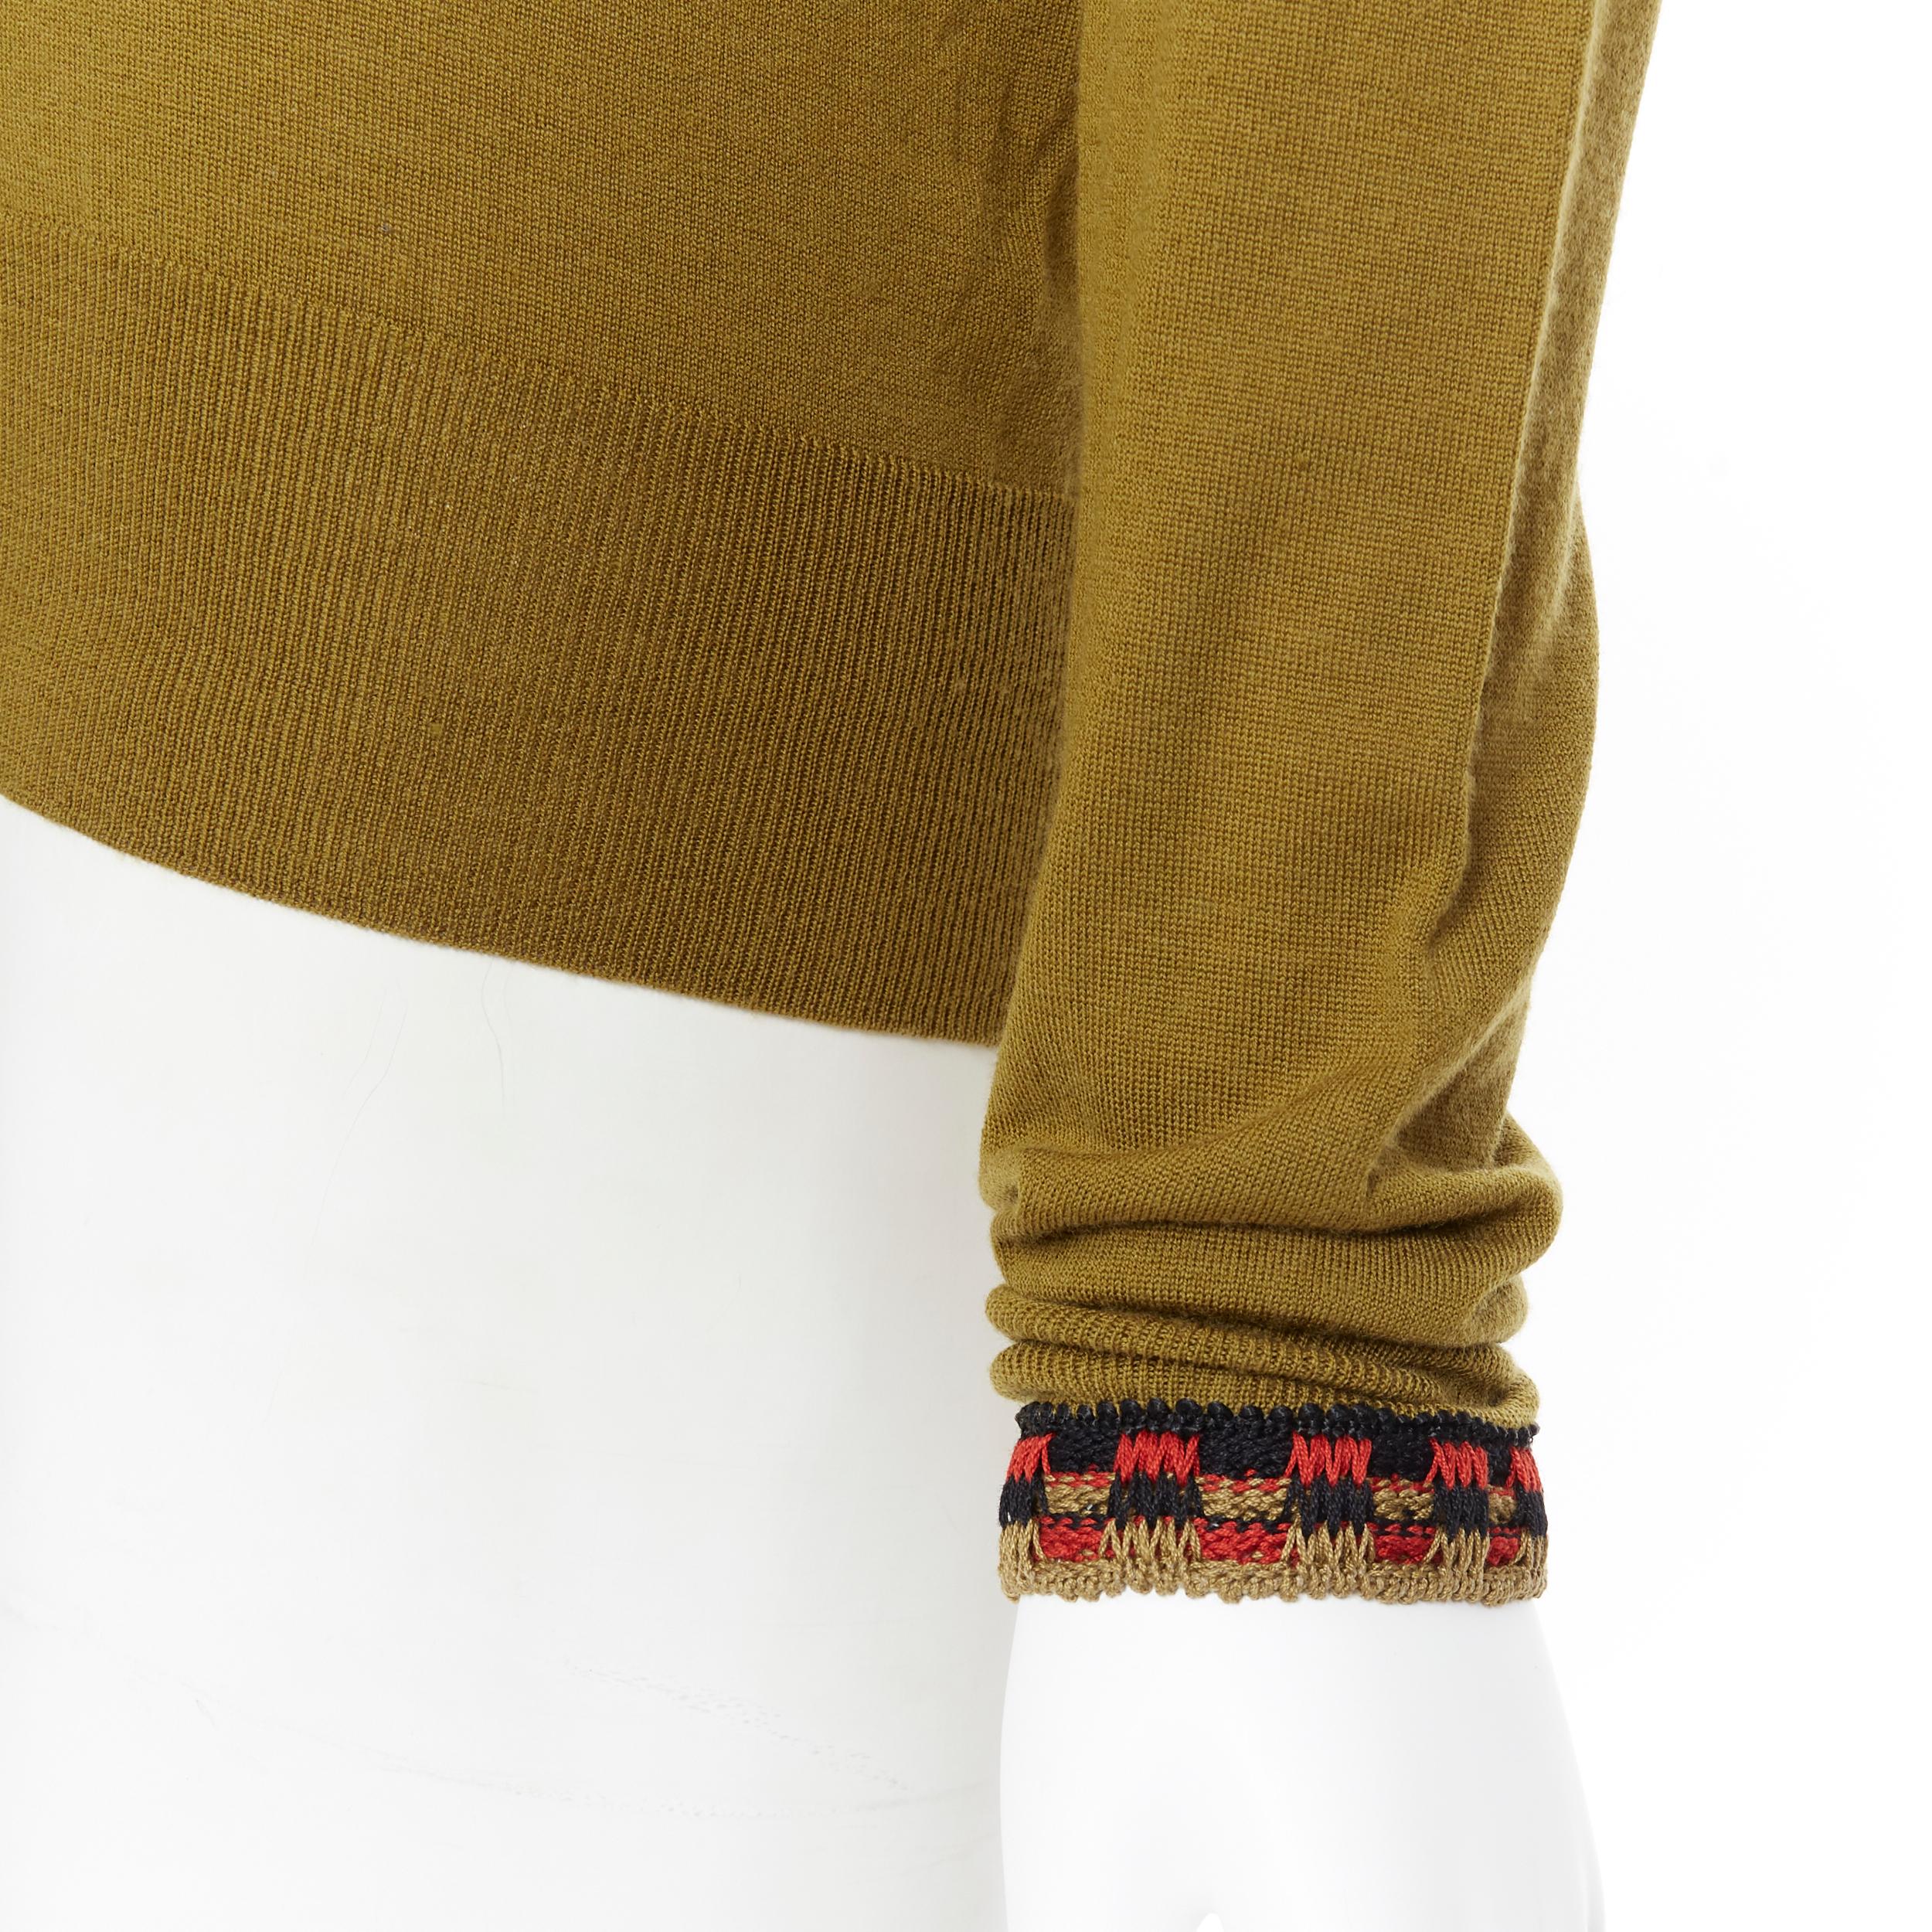 CELINE PHOEBE PHILO 100% wool green vintage logo embroidery cuff sweater XS
Brand: Celine
Designer: Phoebe Philo
Model Name / Style: Wool sweater
Material: Wool
Color: Green
Pattern: Solid
Extra Detail: Tonal embroidery at bodice. Ethic knitted